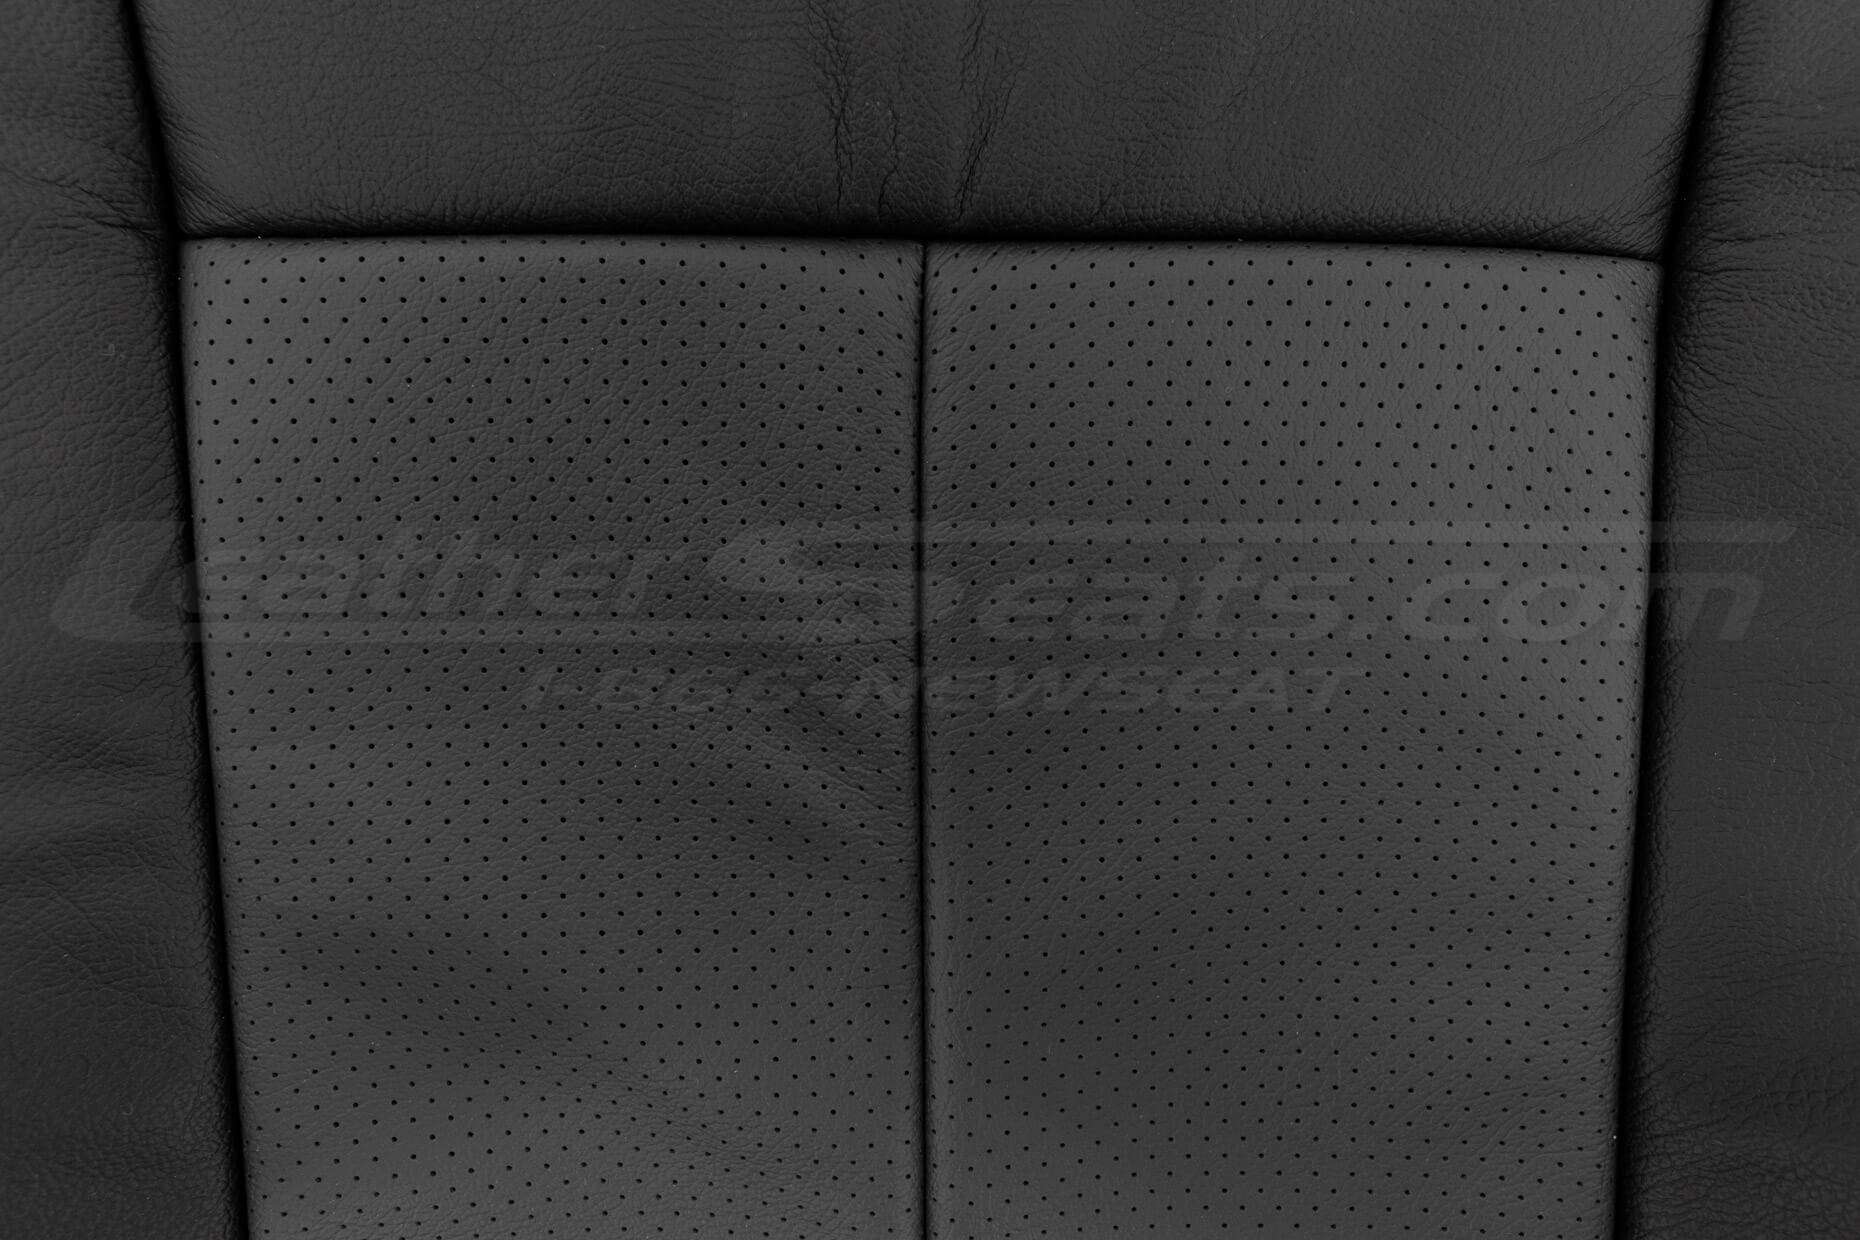 Perforated Graphite Insert section of backrest upholstery